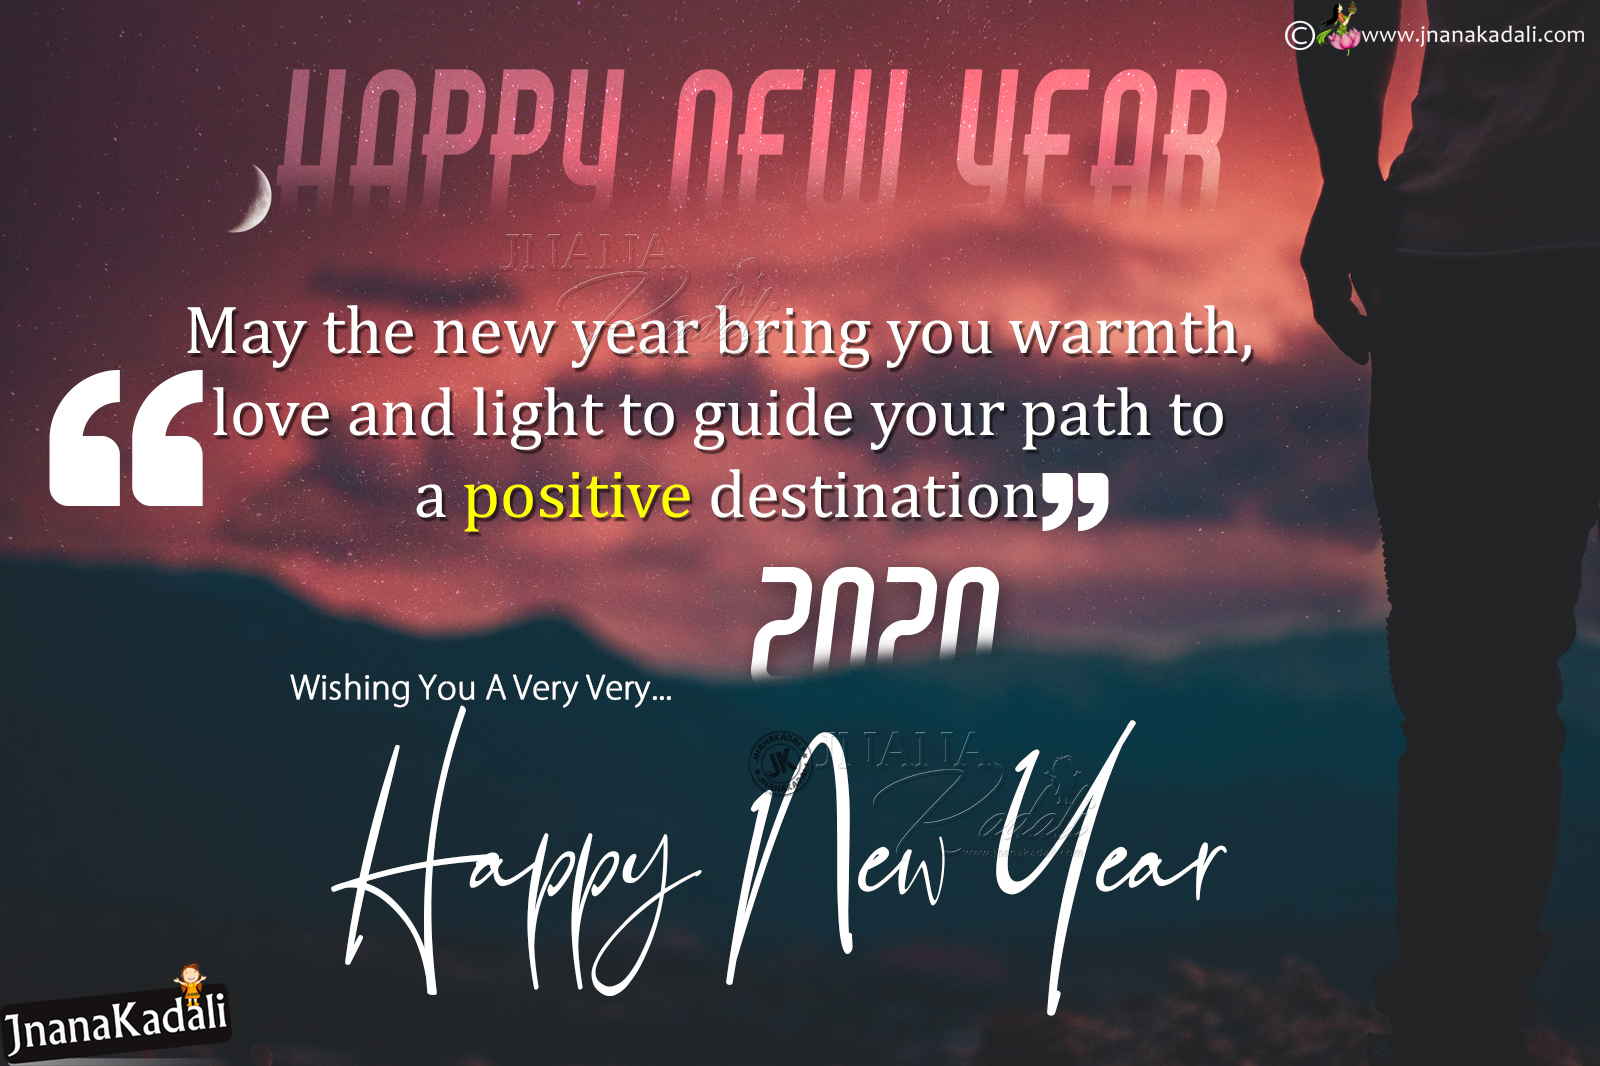 Happy New Year 2020 Wallpapers Greetings in English Free Download ...